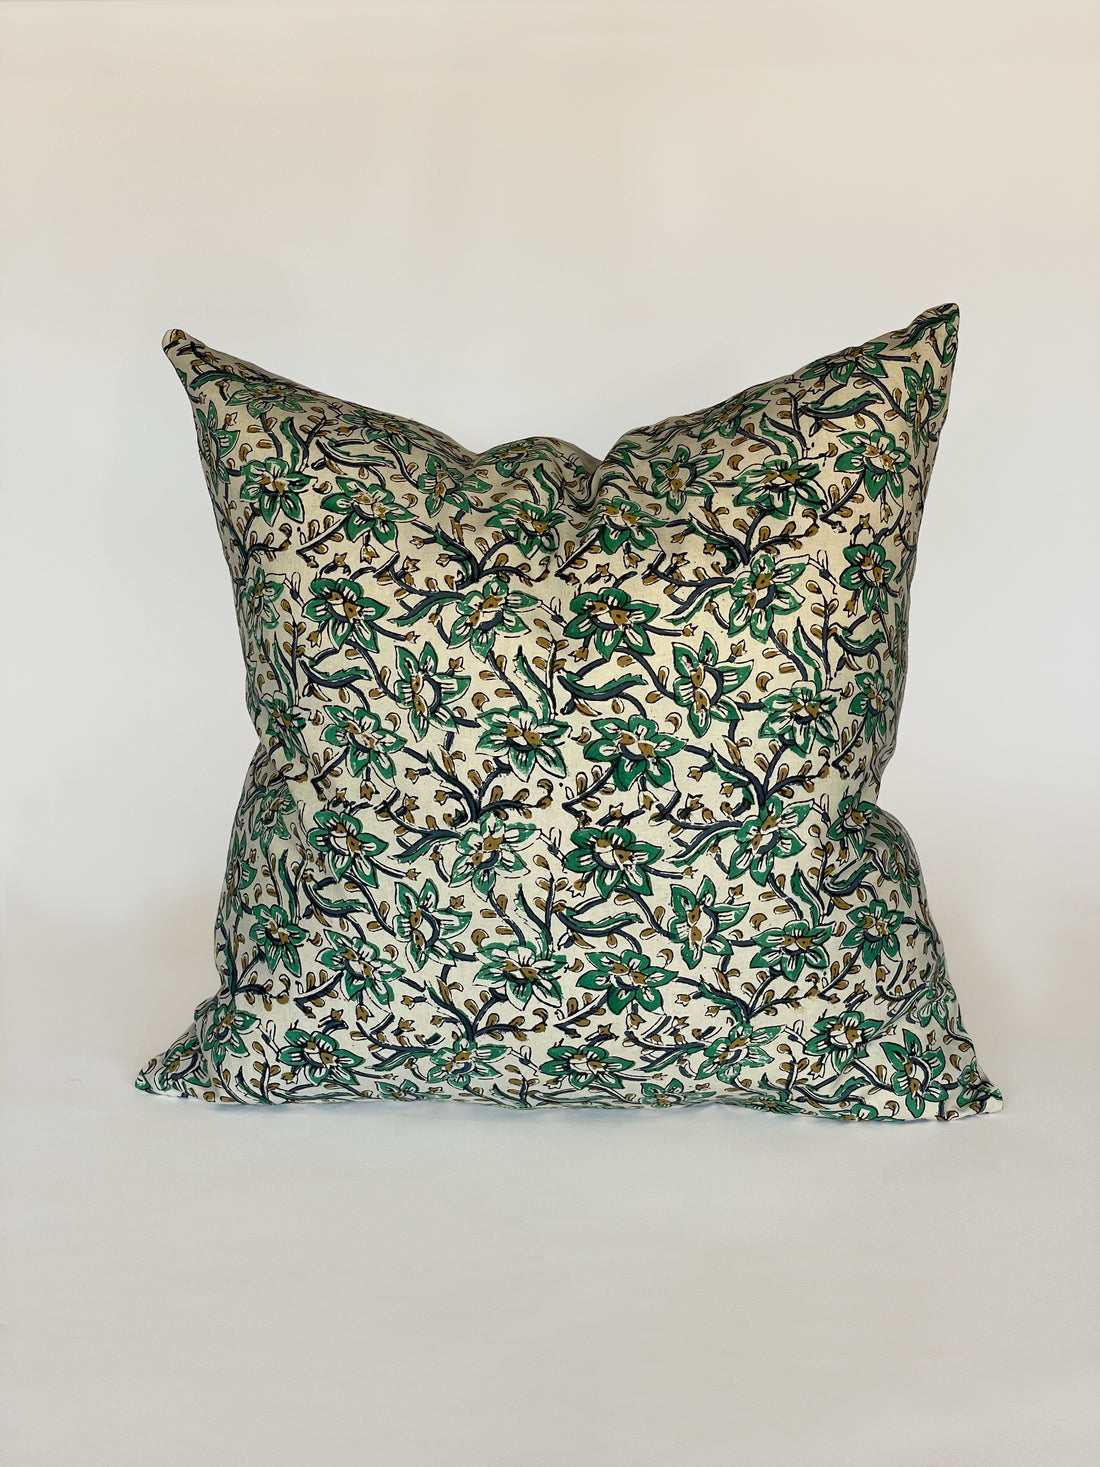 Floral Print Pillow - Green, Black and Gold